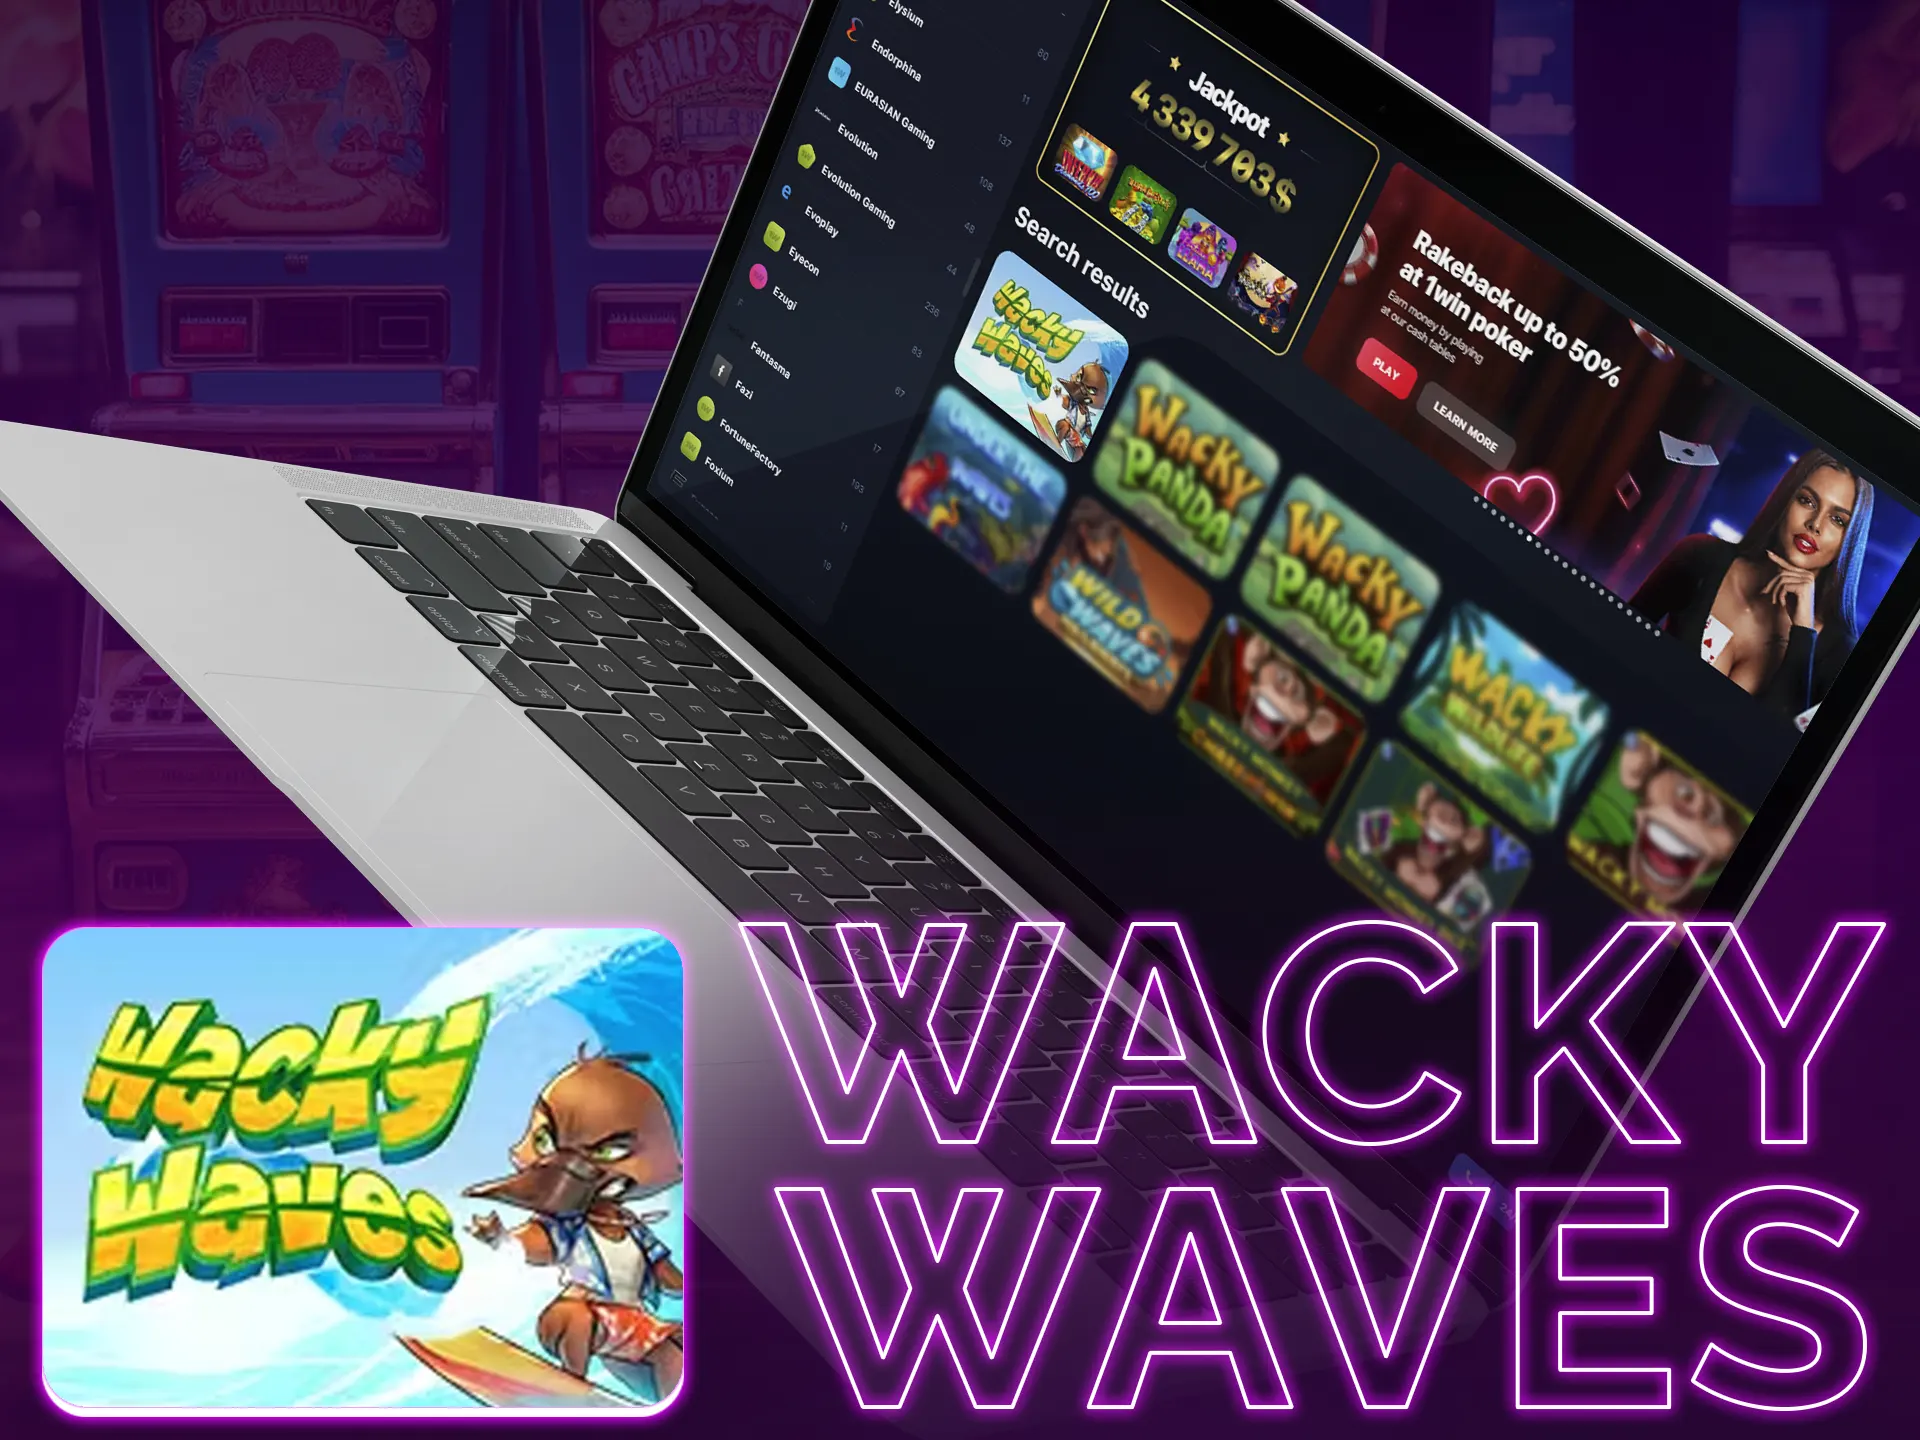 Enjoy summer atmosphere with the Wacky Waves slot provided by Eyecon.